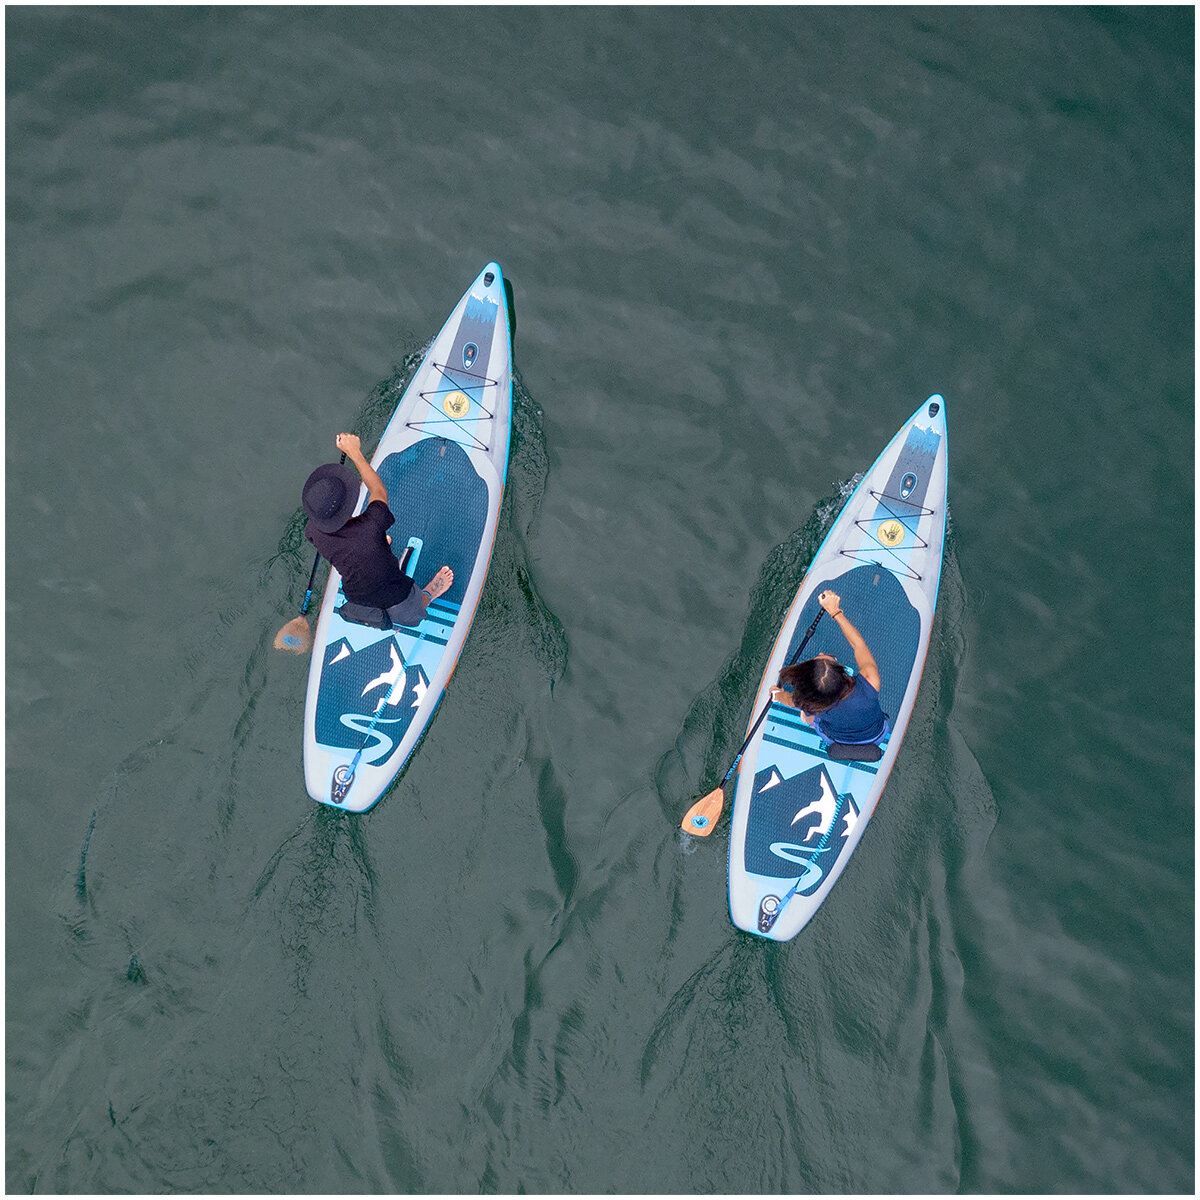 Body Glove The Performer Inflatable Sup Board